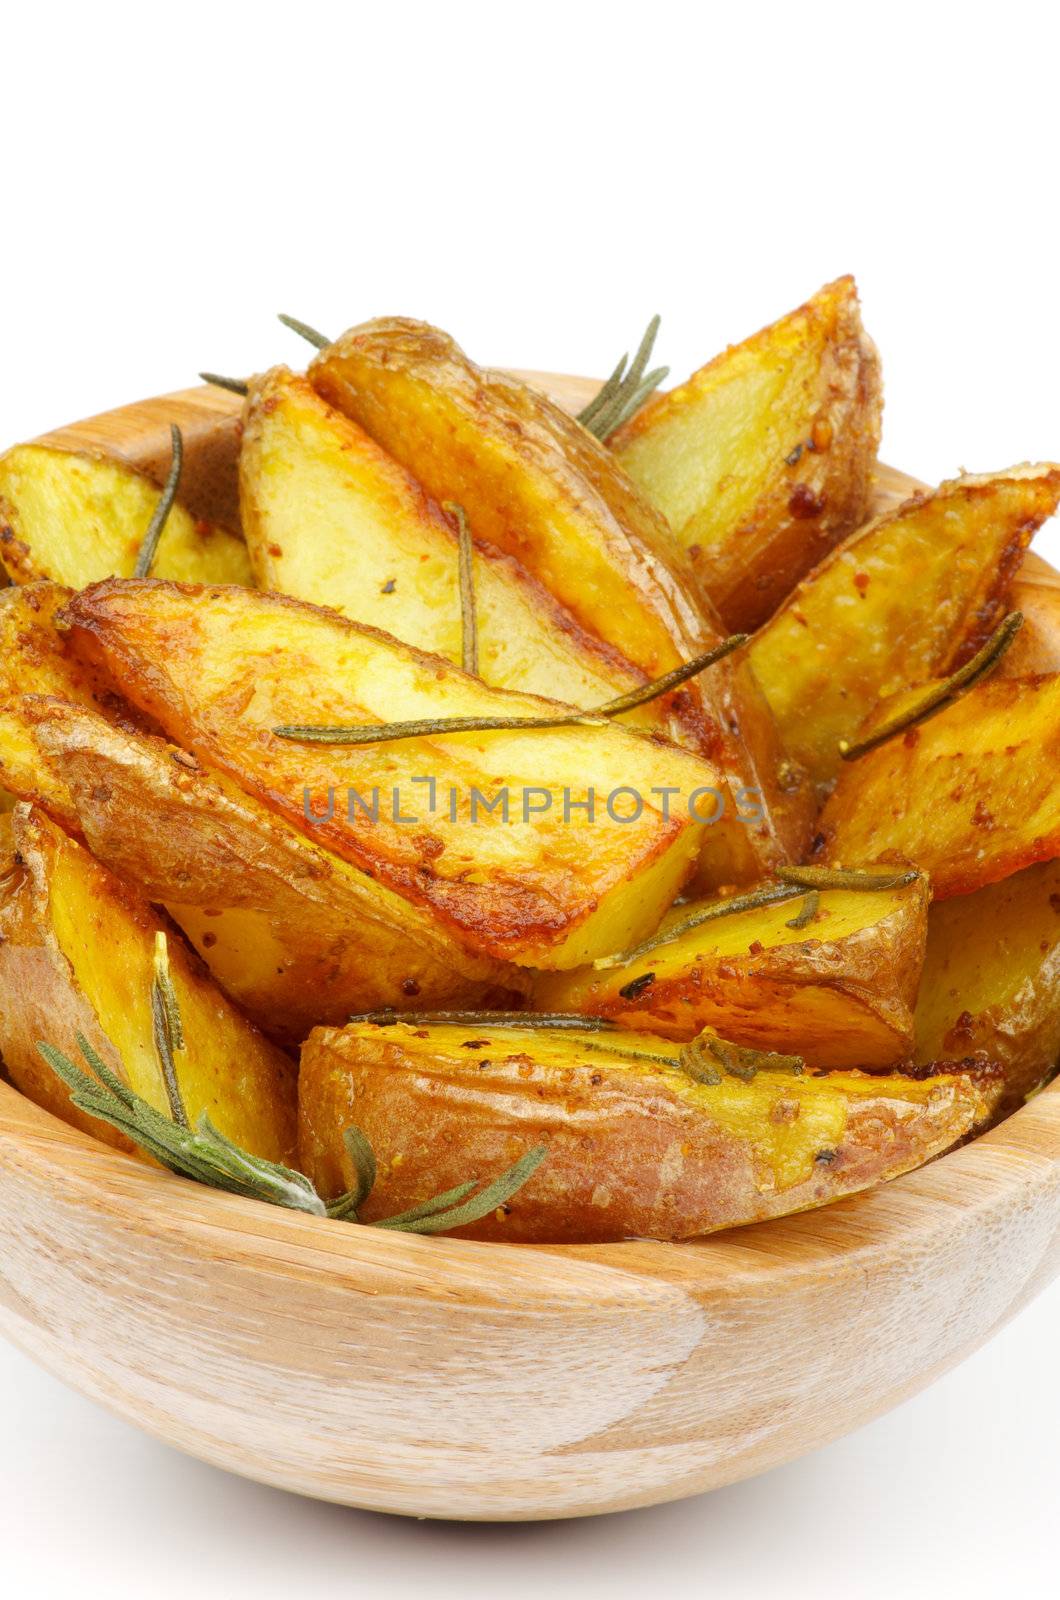 Roasted Potato Wedges with Rosemary and Herbs in Wooden Bowl closeup on white background